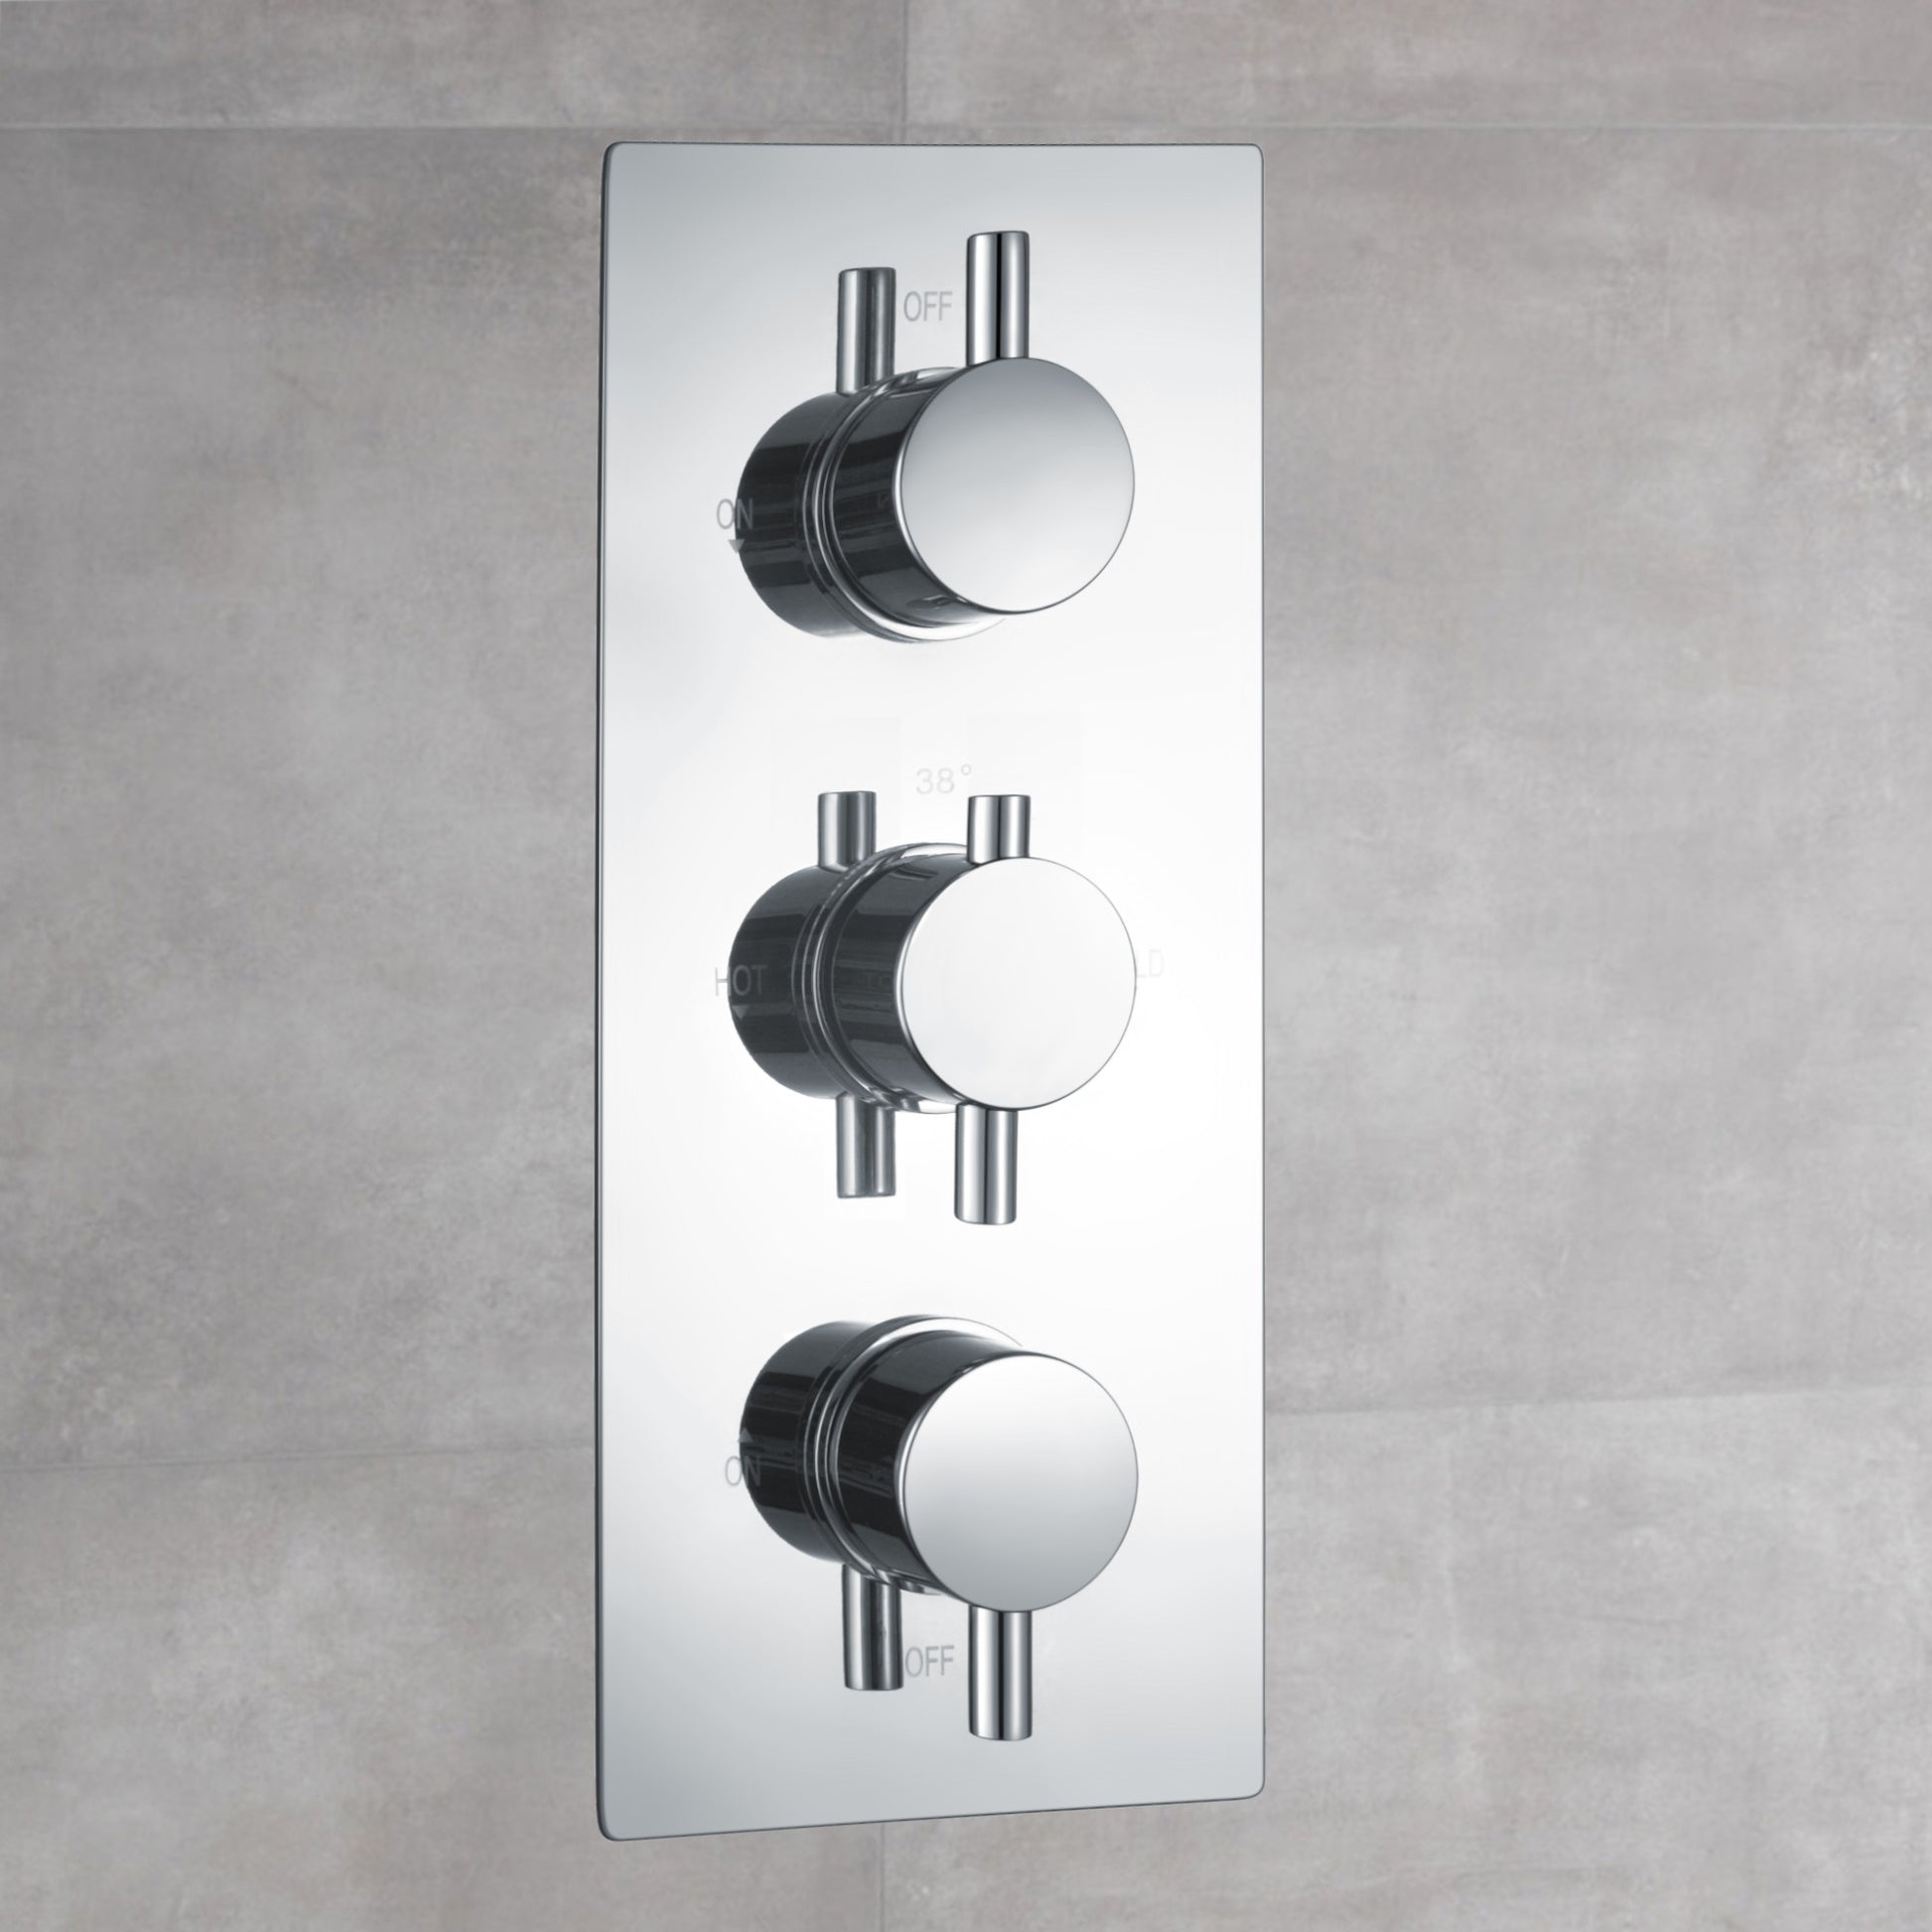 Venice contemporary round concealed thermostatic triple shower valve with 2 outlets - chrome - Showers